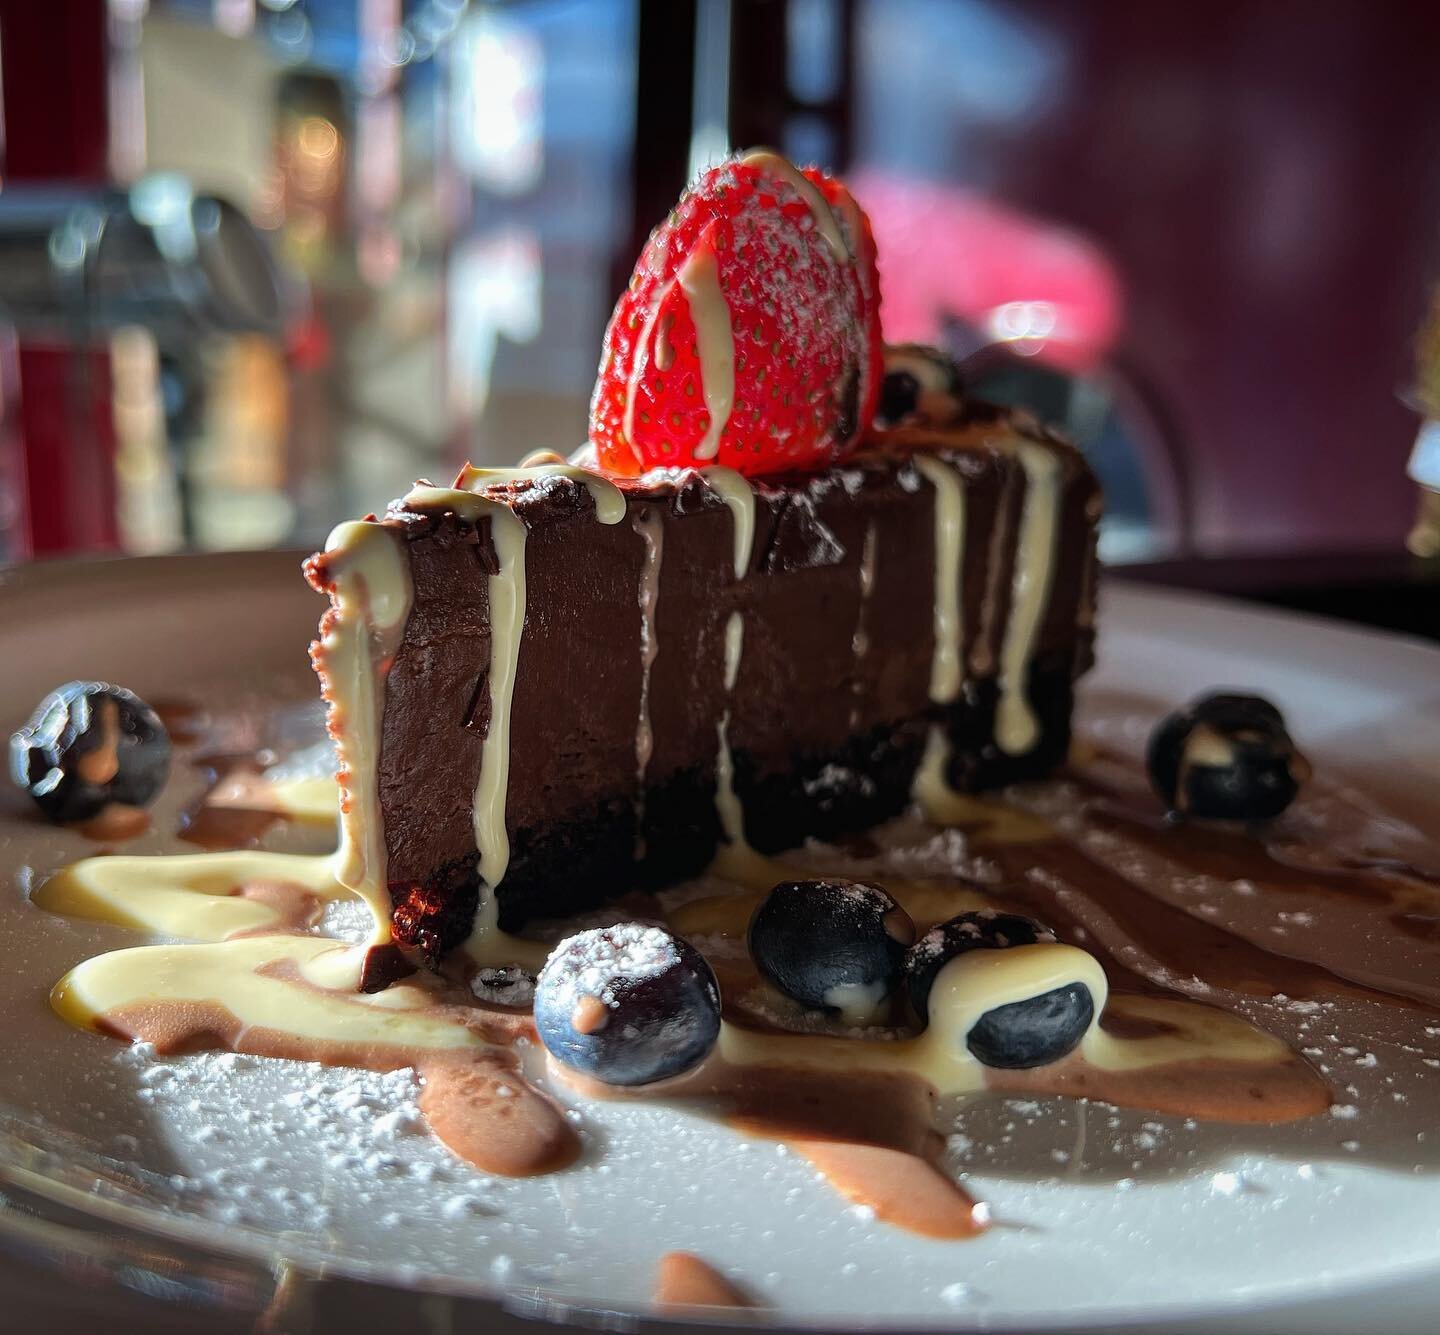 Sweet tooth happiness🤤
Chocolate mousse cake with the perfect harmony of sweetness and chocolate! Match made in heaven 🧚&zwj;♀️ 
&bull;
#bayridge #brooklyn